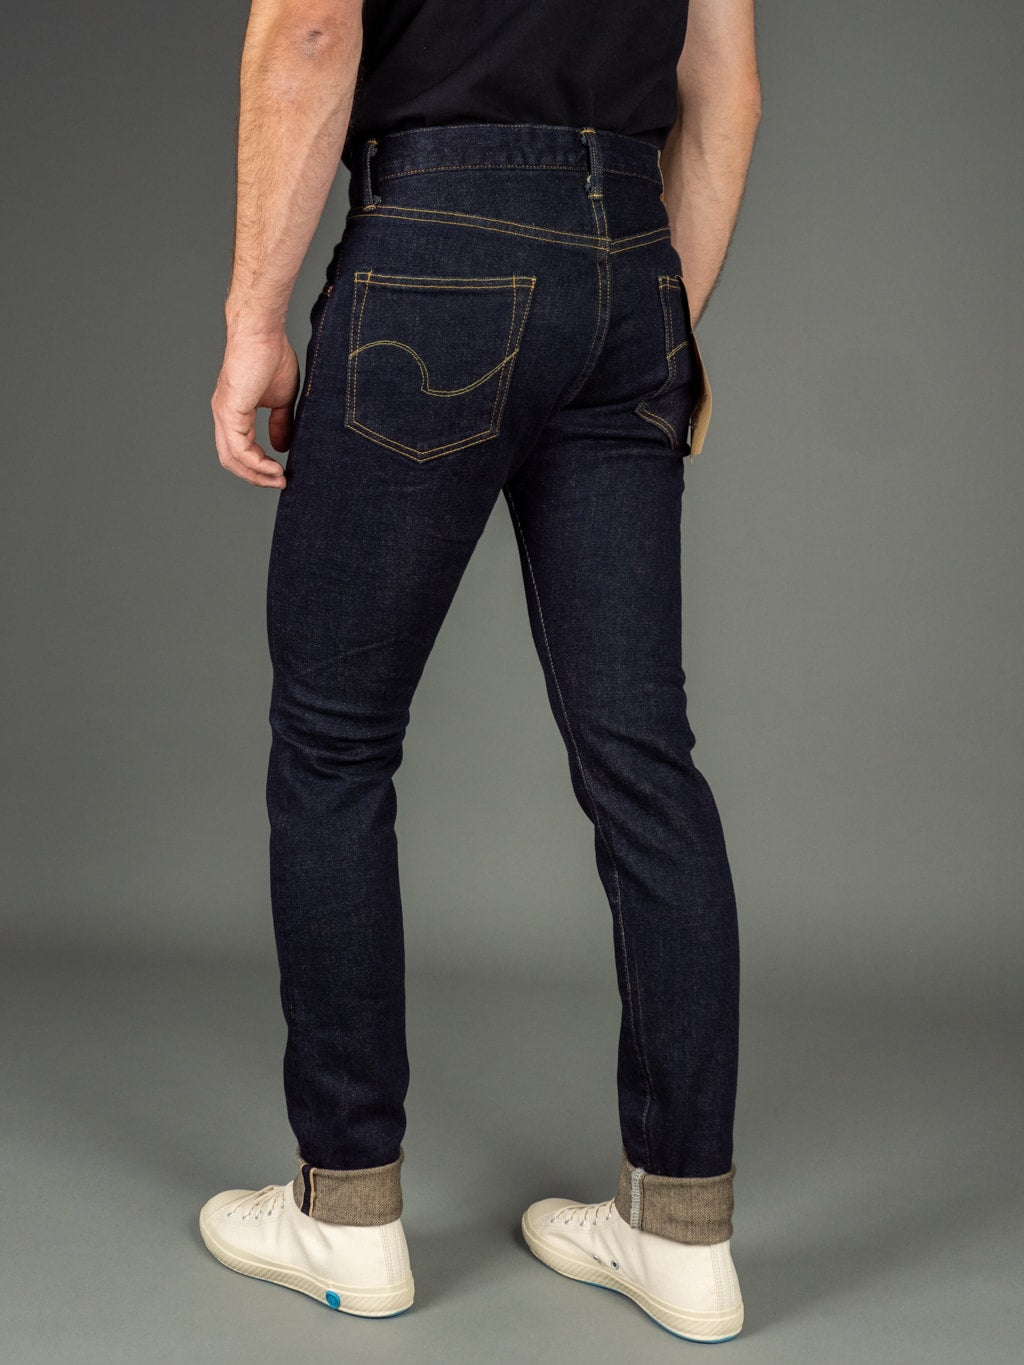 ONI Denim Beige Overdye Stretch Relax Tapered Jeans Fit